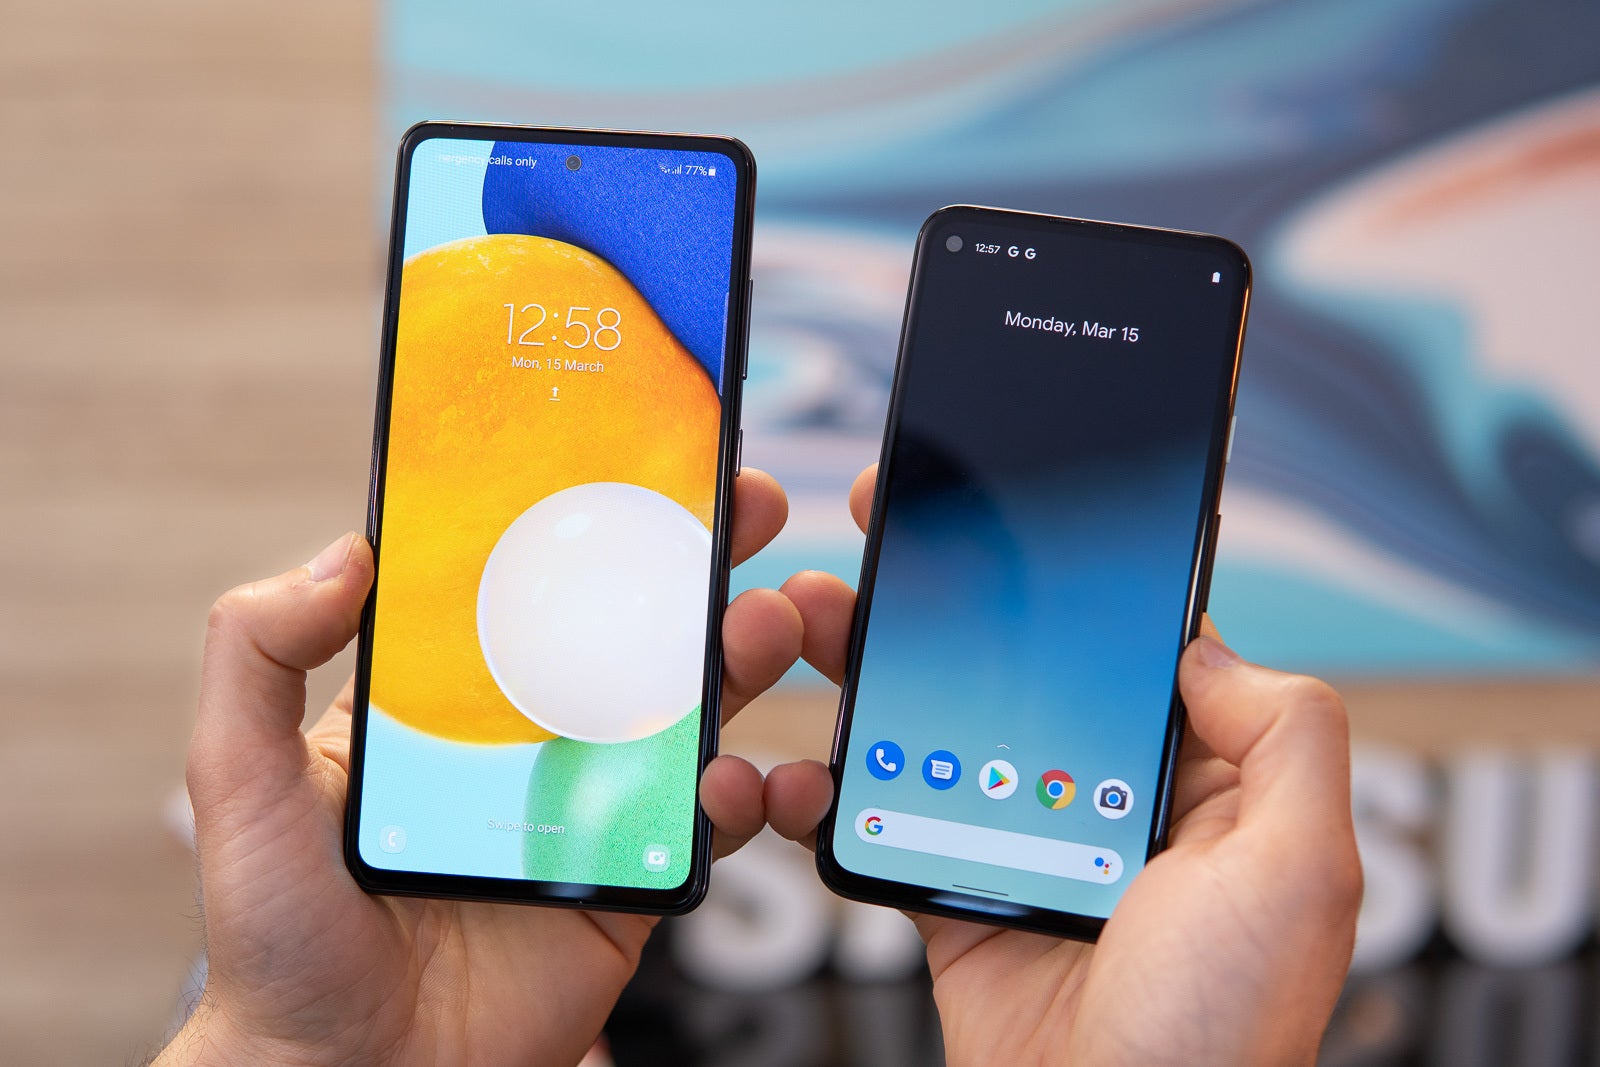 Flagships are great, but budget phones often offer greater value - Best budget and affordable phones in 2022: a buyer's guide